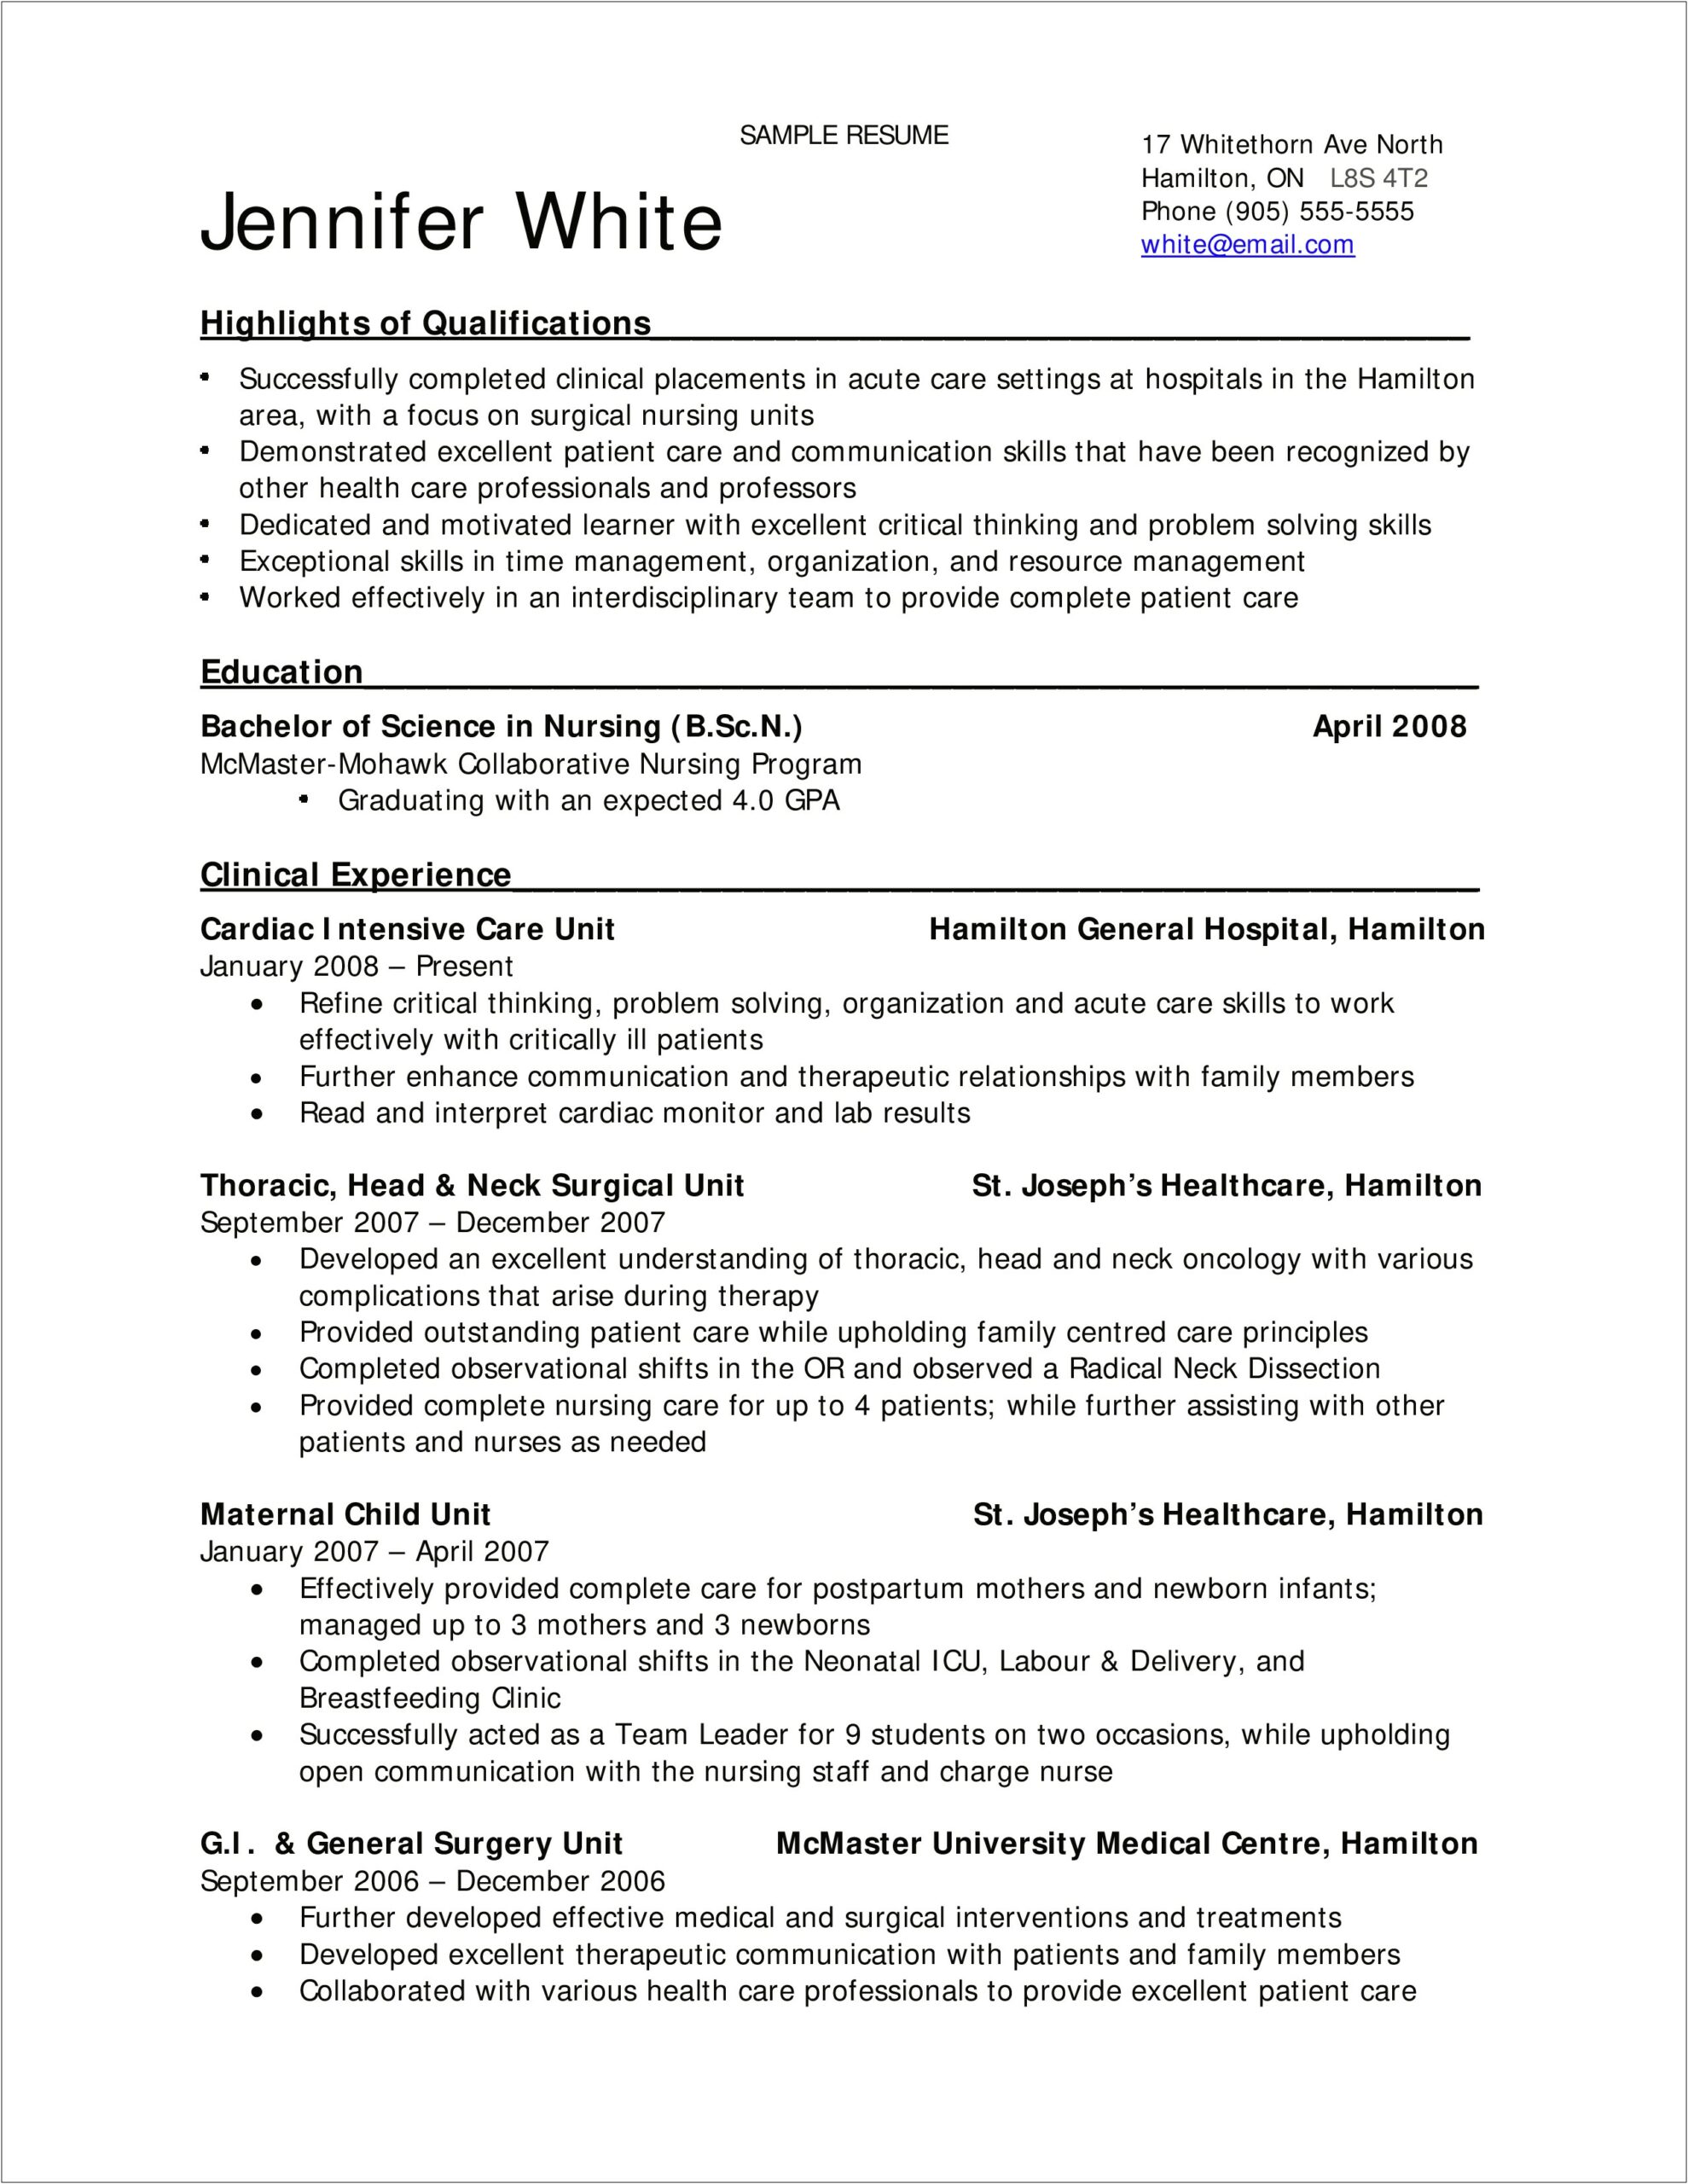 Sample Critical Care Skills Section On Resume